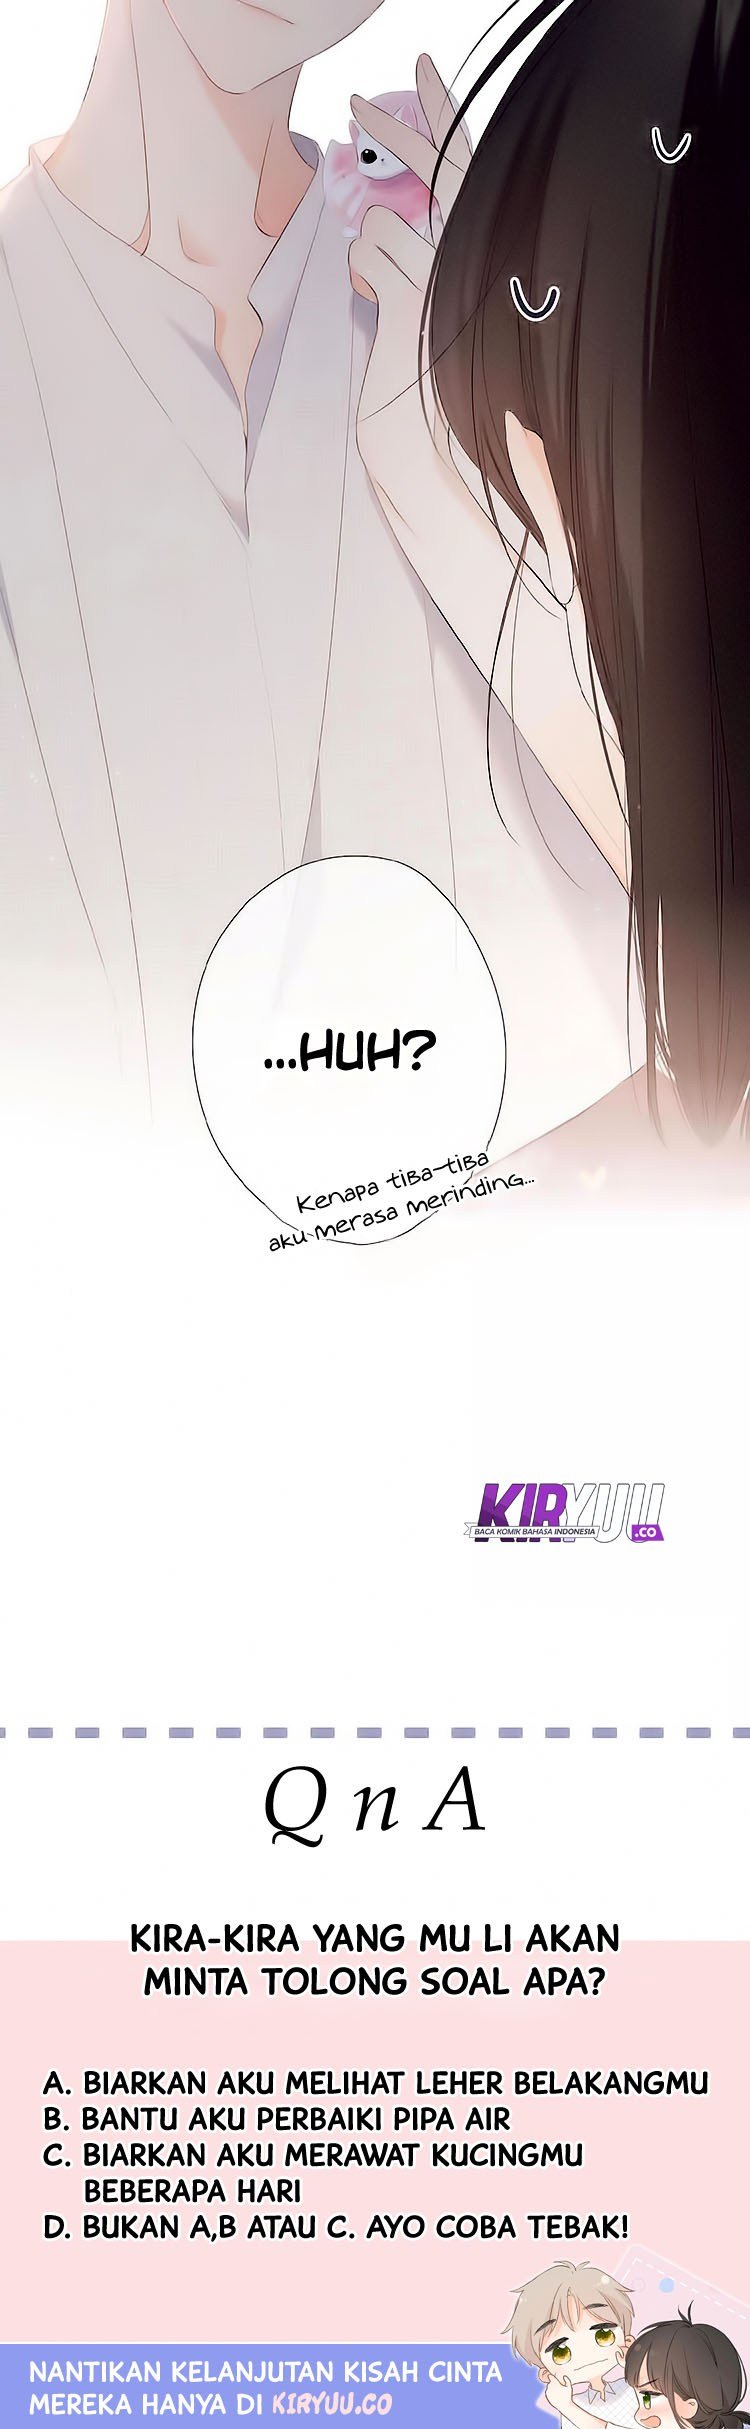 Once More Chapter 04